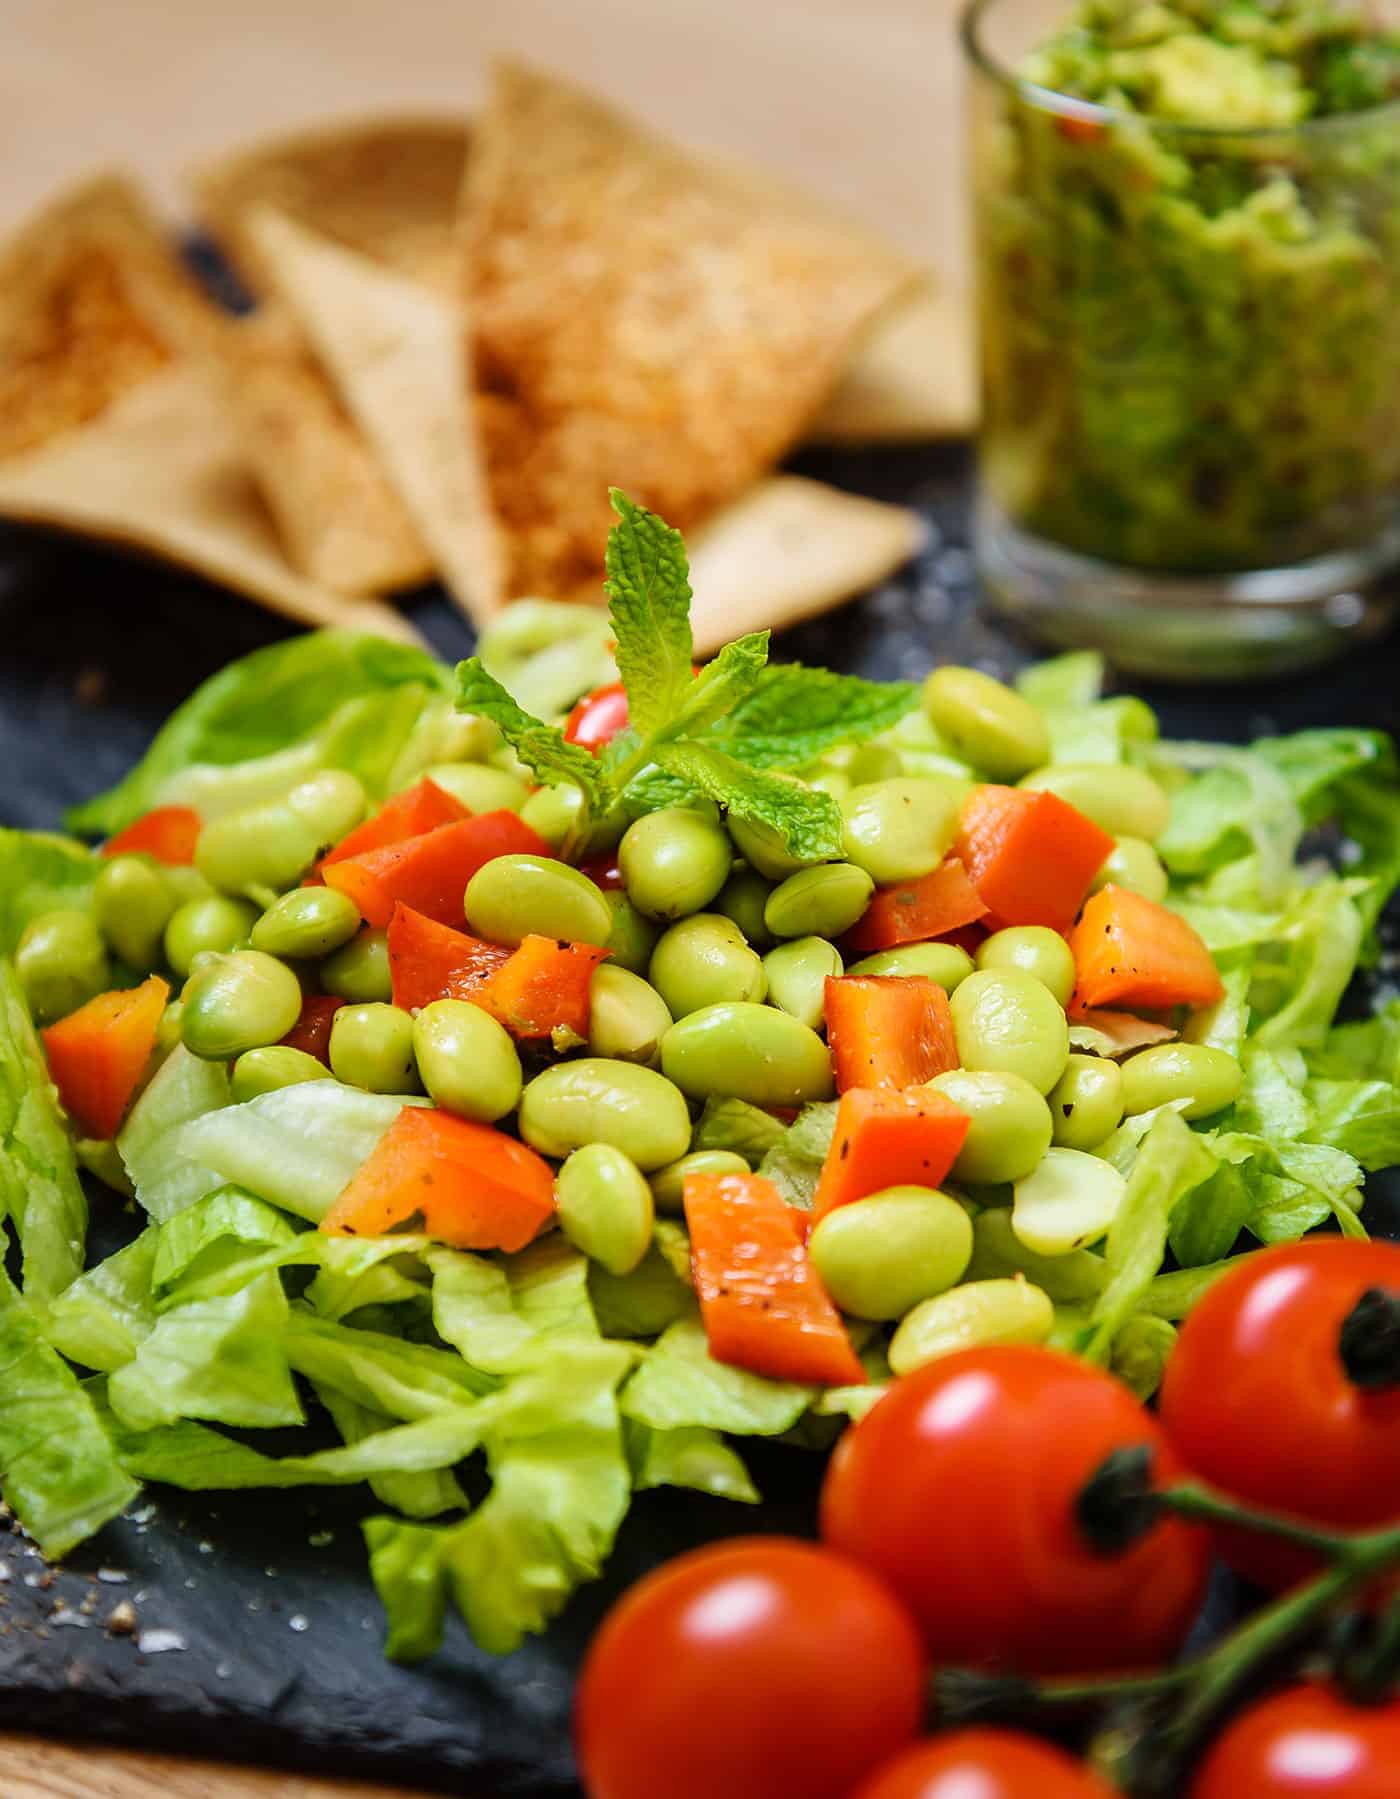 Close up of Warm Edamame Salad served with Guacamole and Home-baked Tortillas